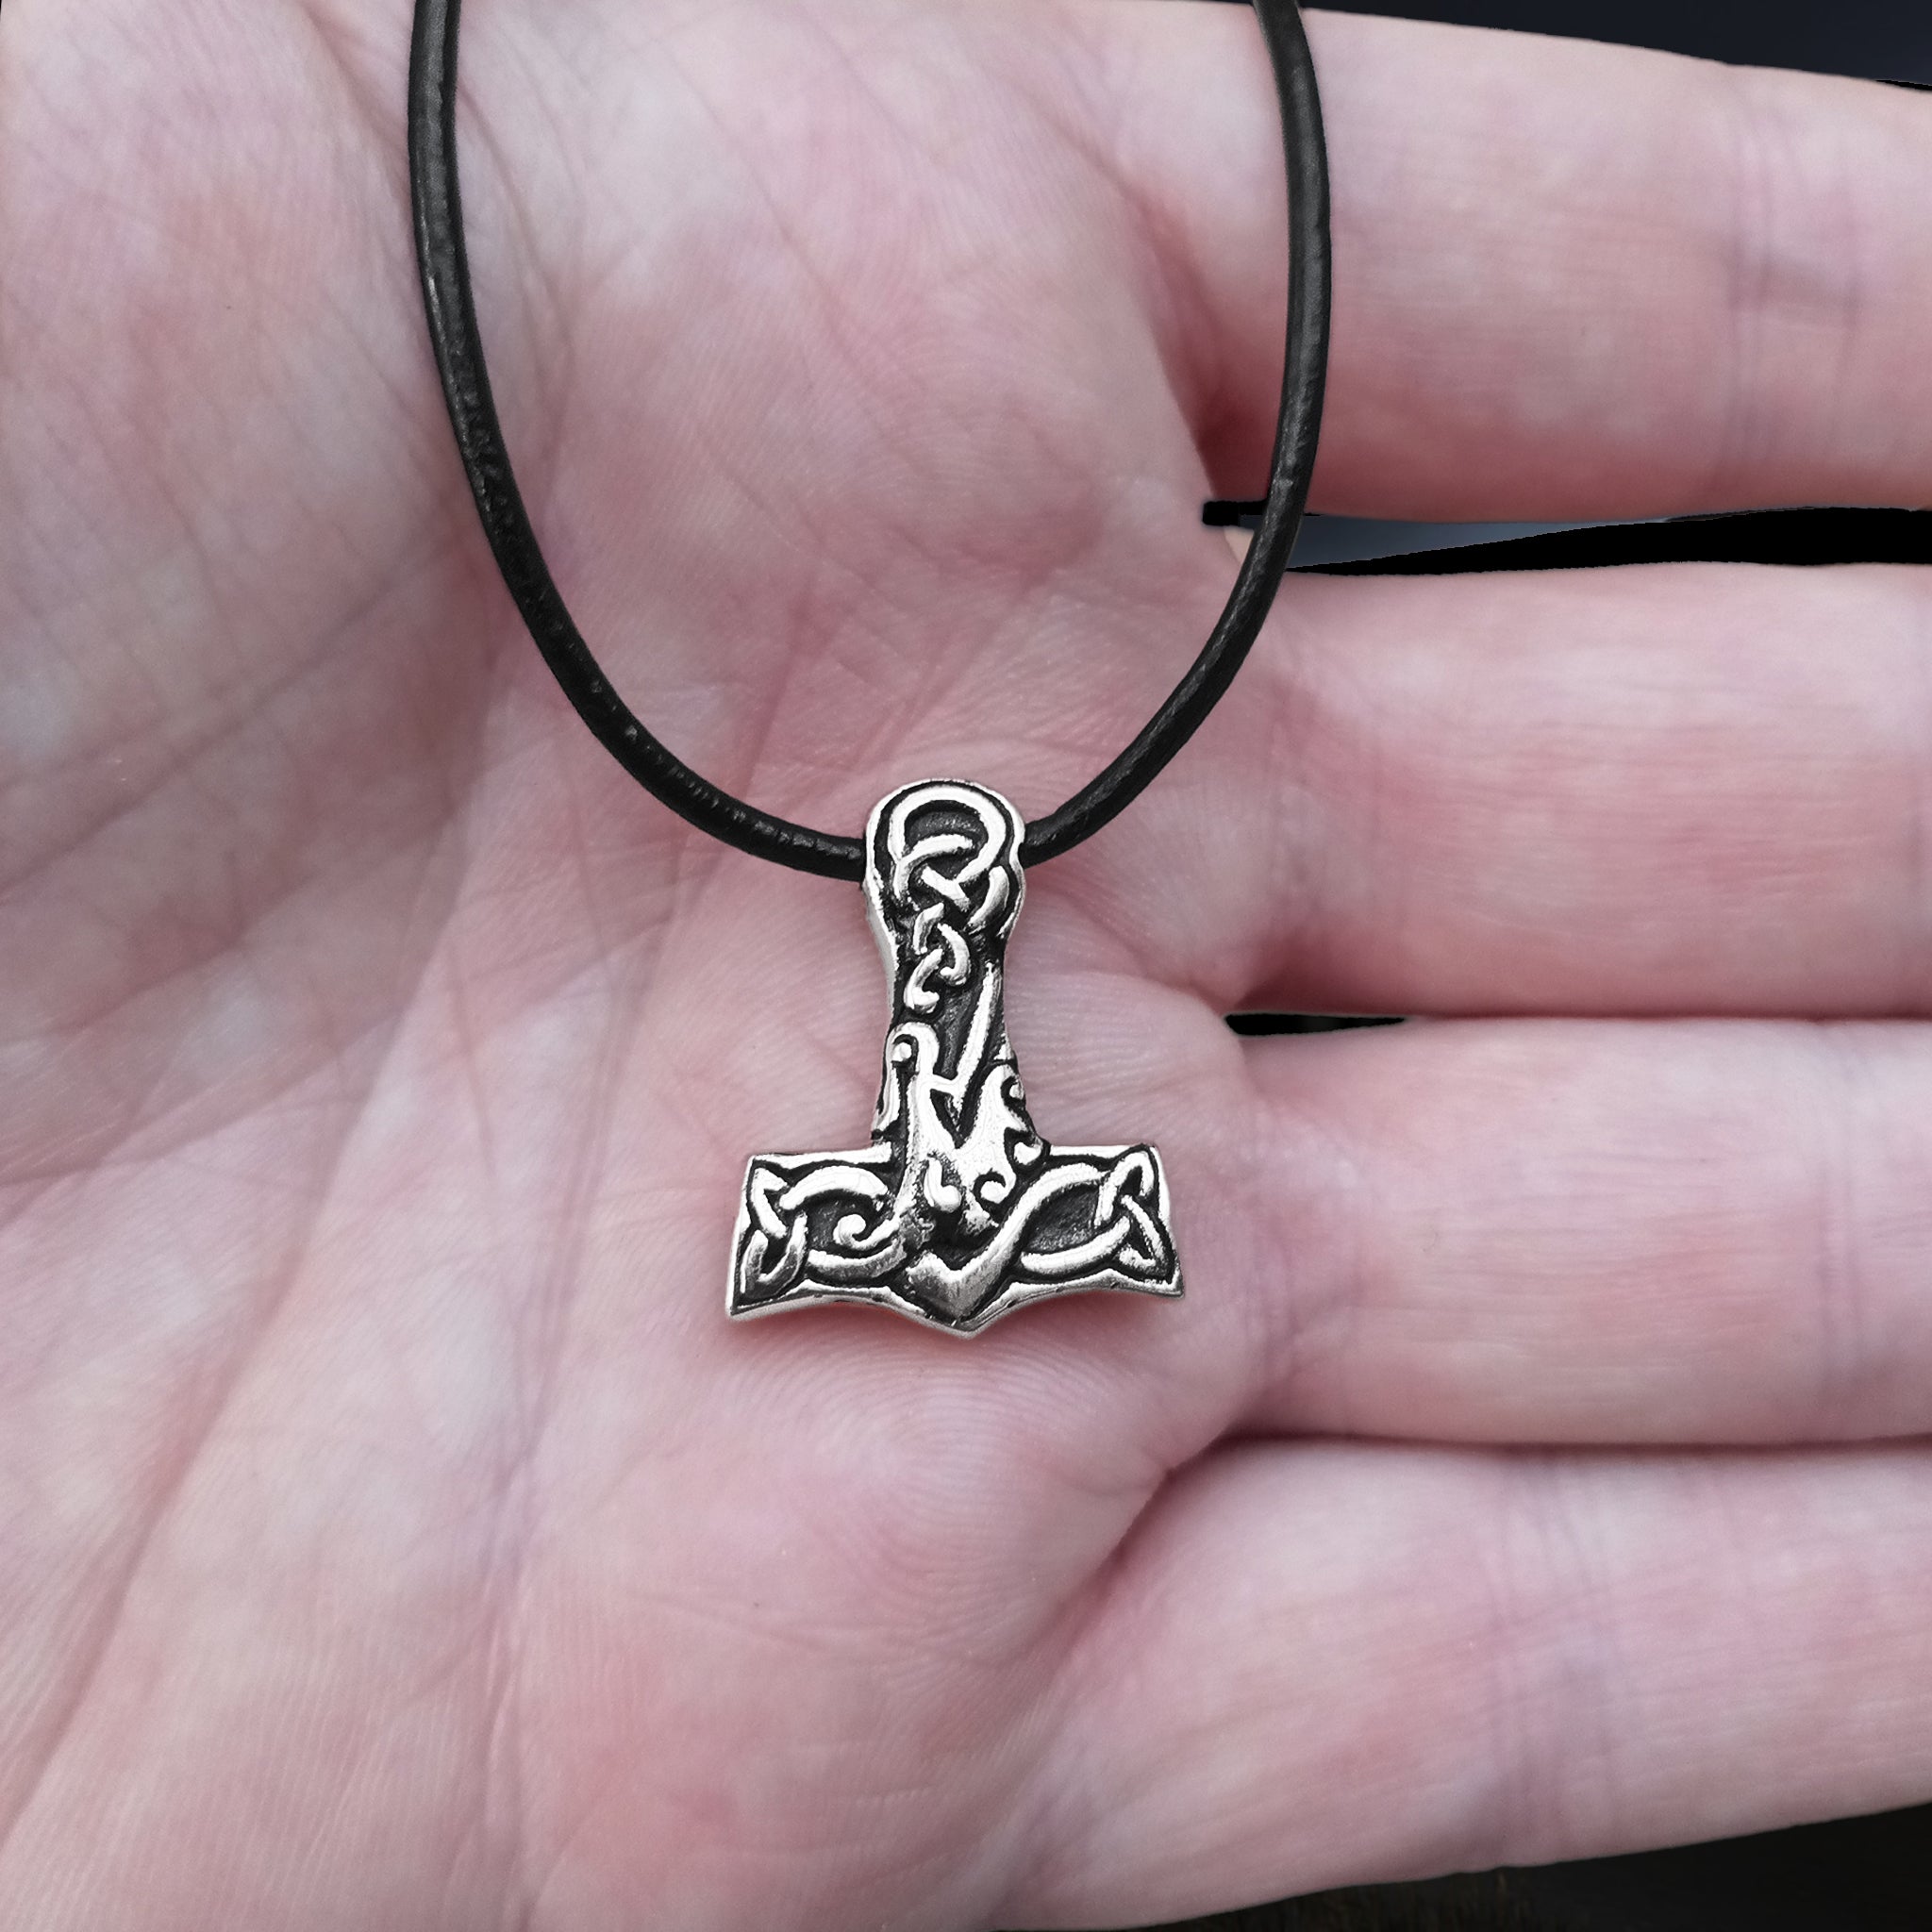 Small Silver Interlace Thors Hammer Viking Pendant on Leather Thong on Hand